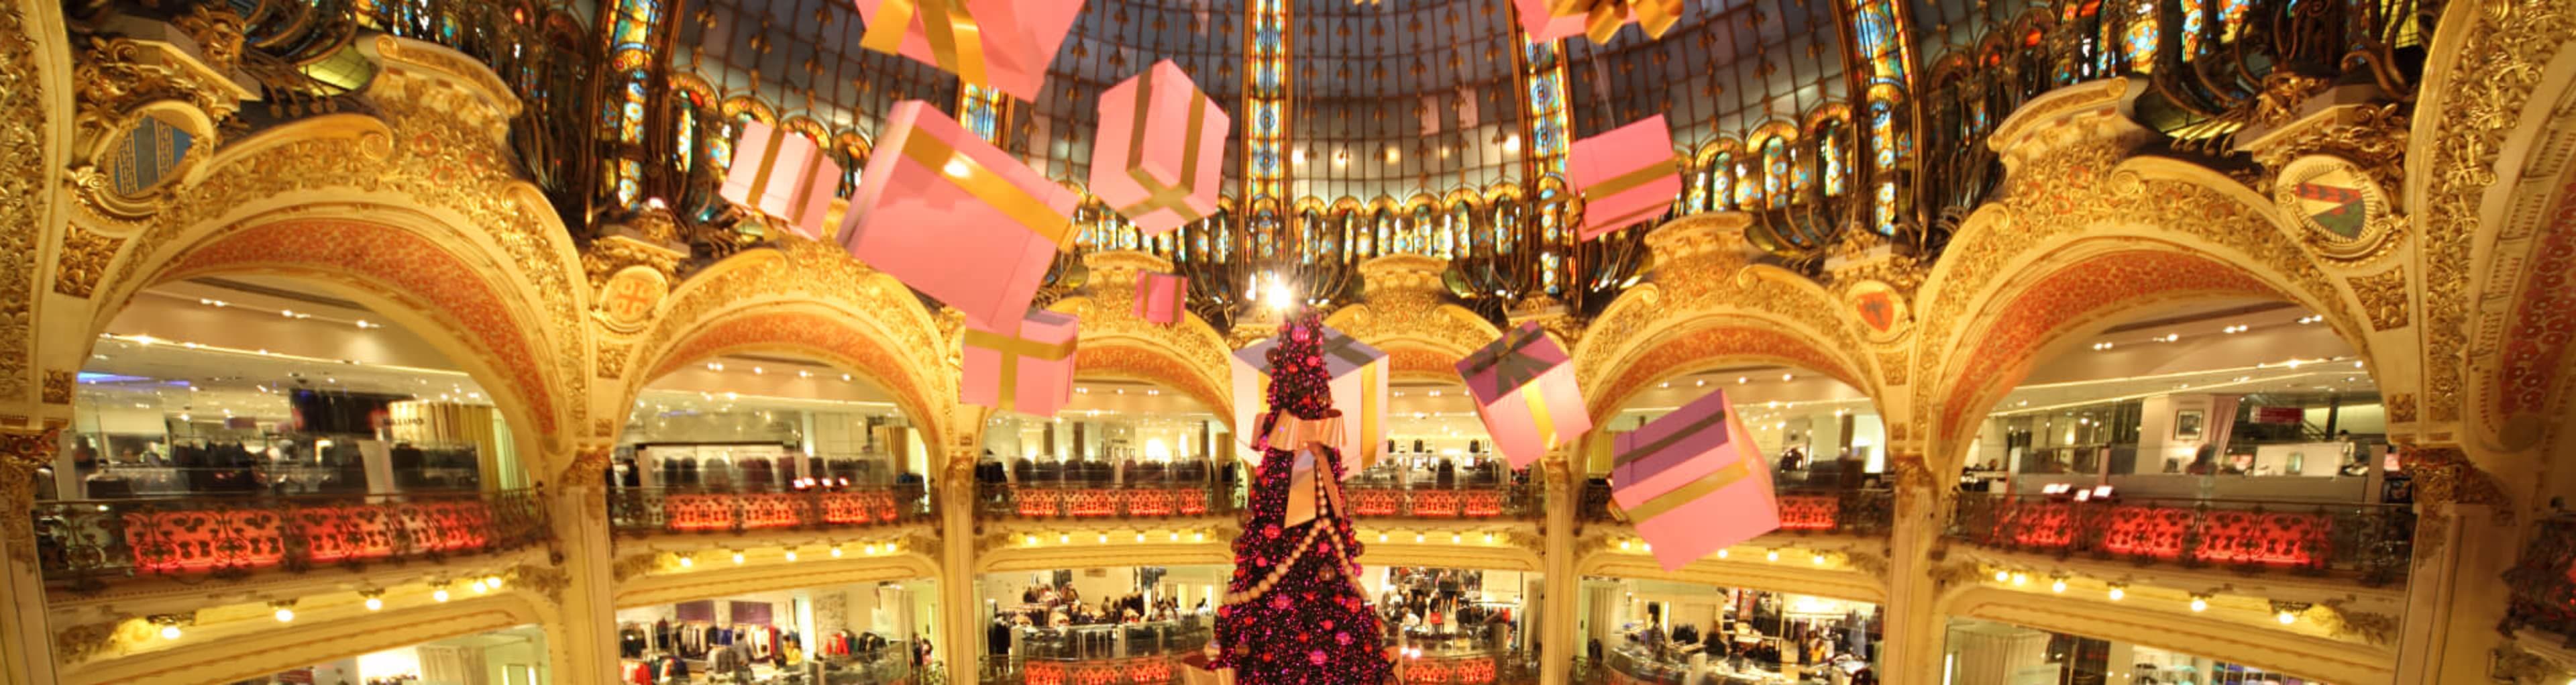 Main atrium of the Galeries Lafayette department store at Christmas